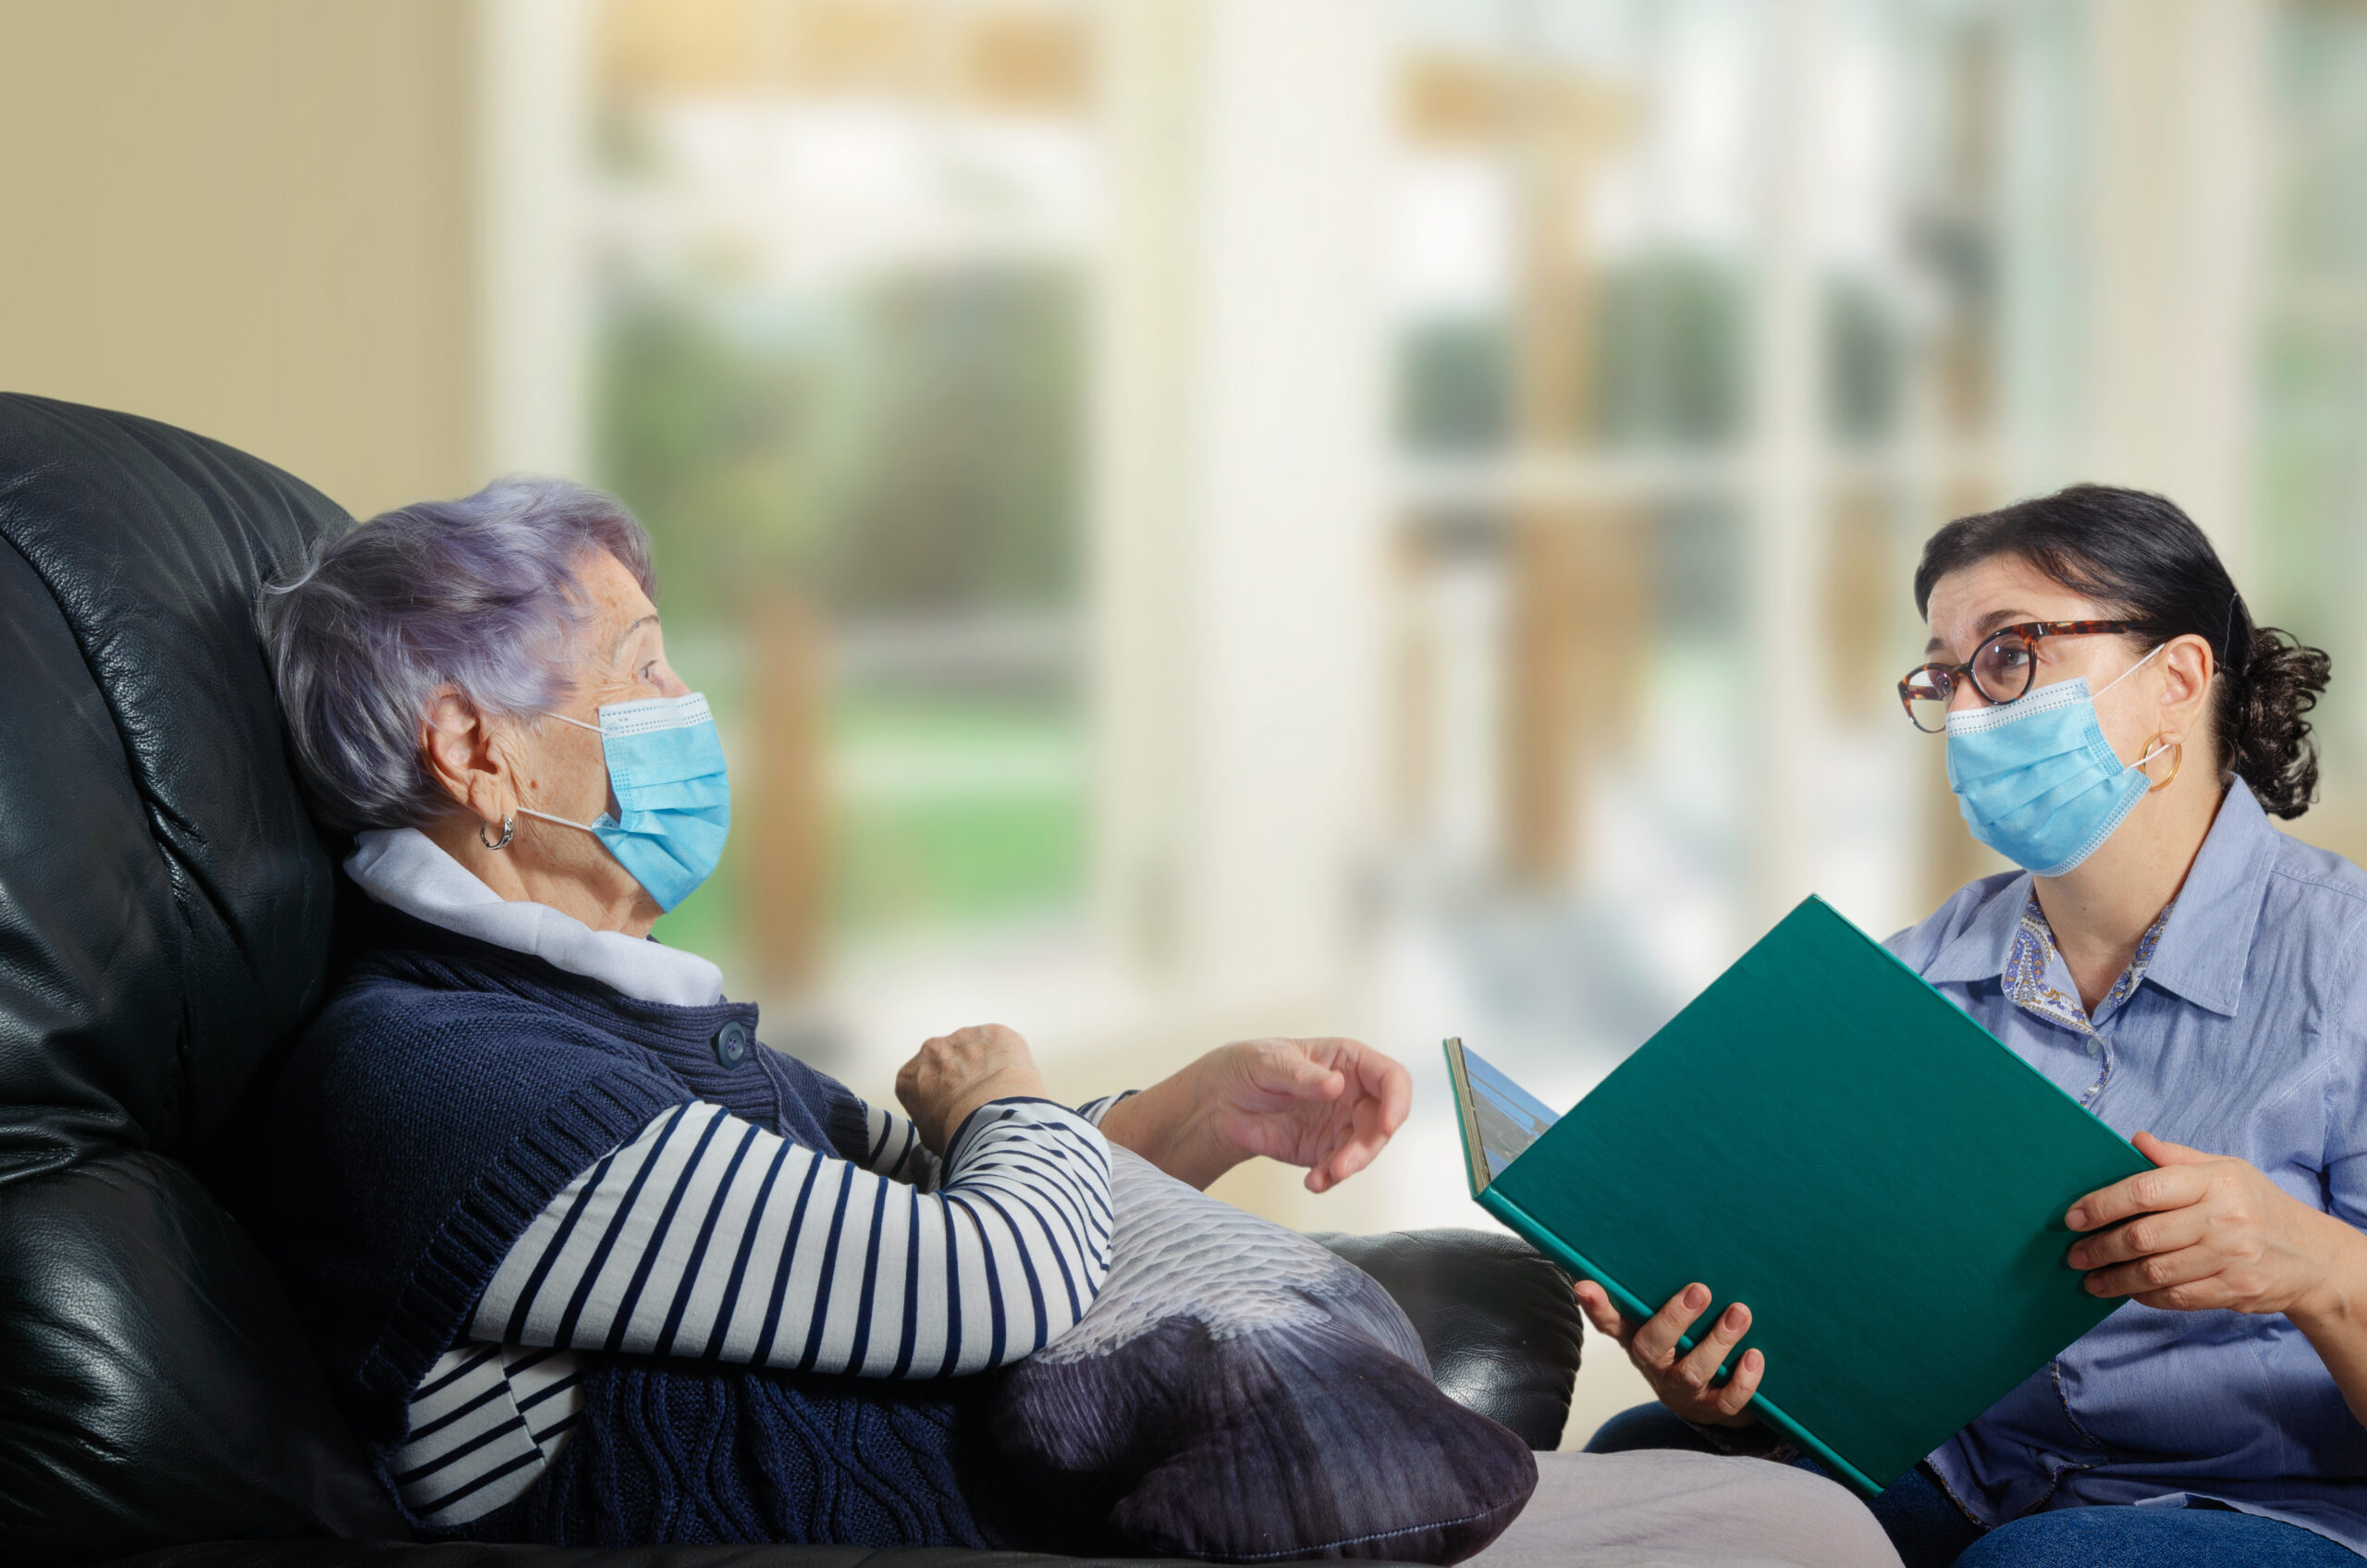 A female adult volunteer visits a single senior woman during a pandemic. She talks to her and reads books. Both wear face protective masks.